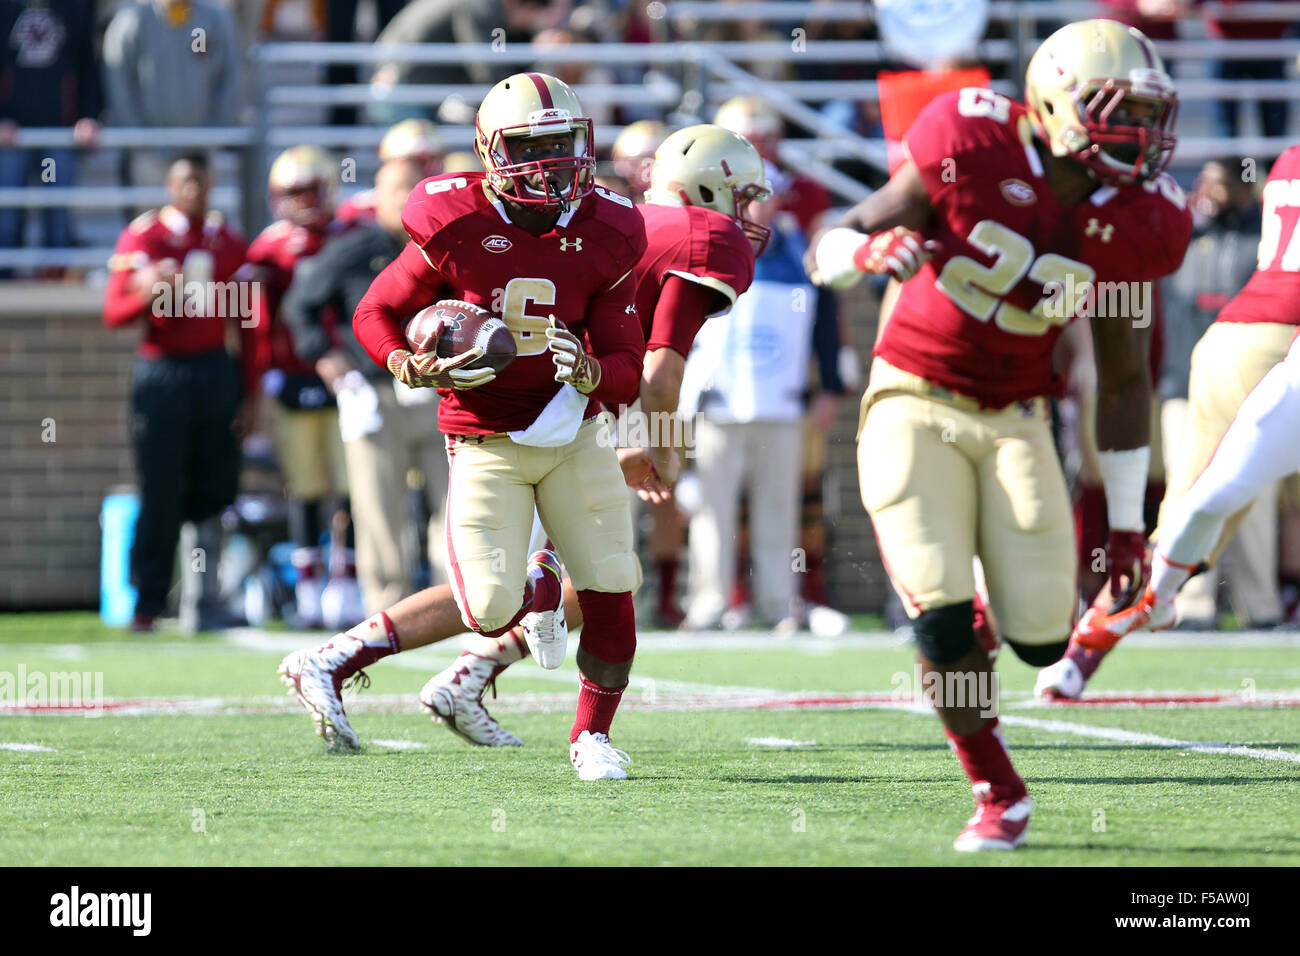 Alumni Stadium. 31st Oct, 2015. MA, USA; Boston College Eagles wide receiver Sherman Alston (6) returns a punt during the first half of the NCAA football game between the Boston College Eagles and Virginia Tech Hokies at Alumni Stadium. Virginia Tech defeated Boston College 26-10. Anthony Nesmith/Cal Sport Media/Alamy Live News Stock Photo